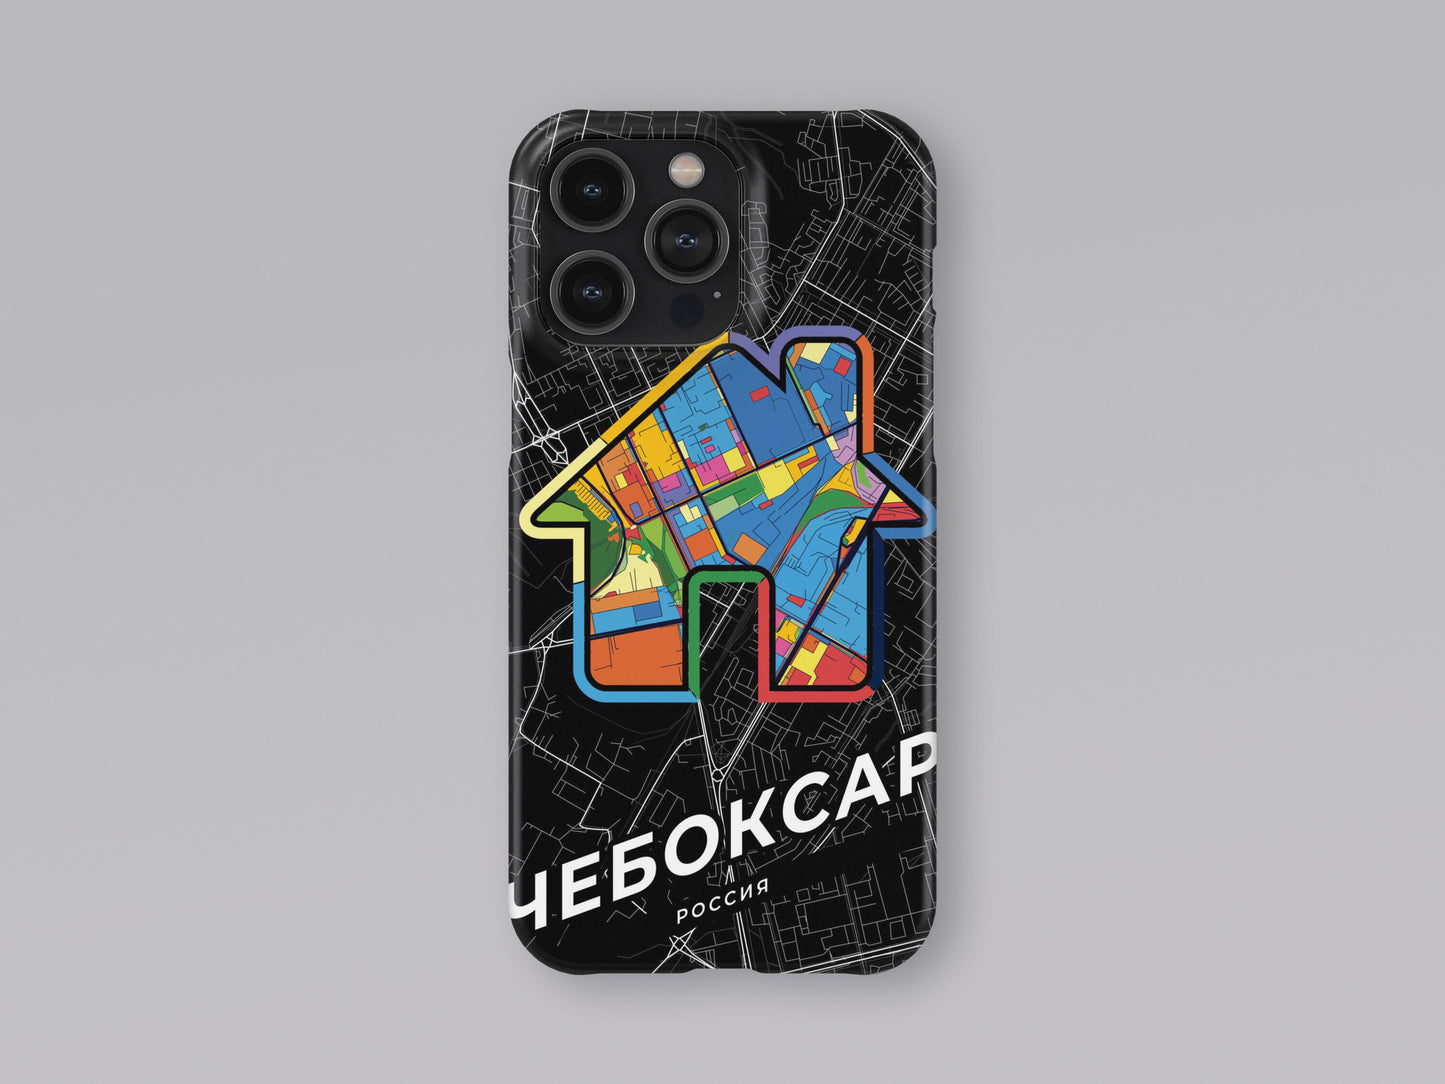 Cheboksary Russia slim phone case with colorful icon. Birthday, wedding or housewarming gift. Couple match cases. 3